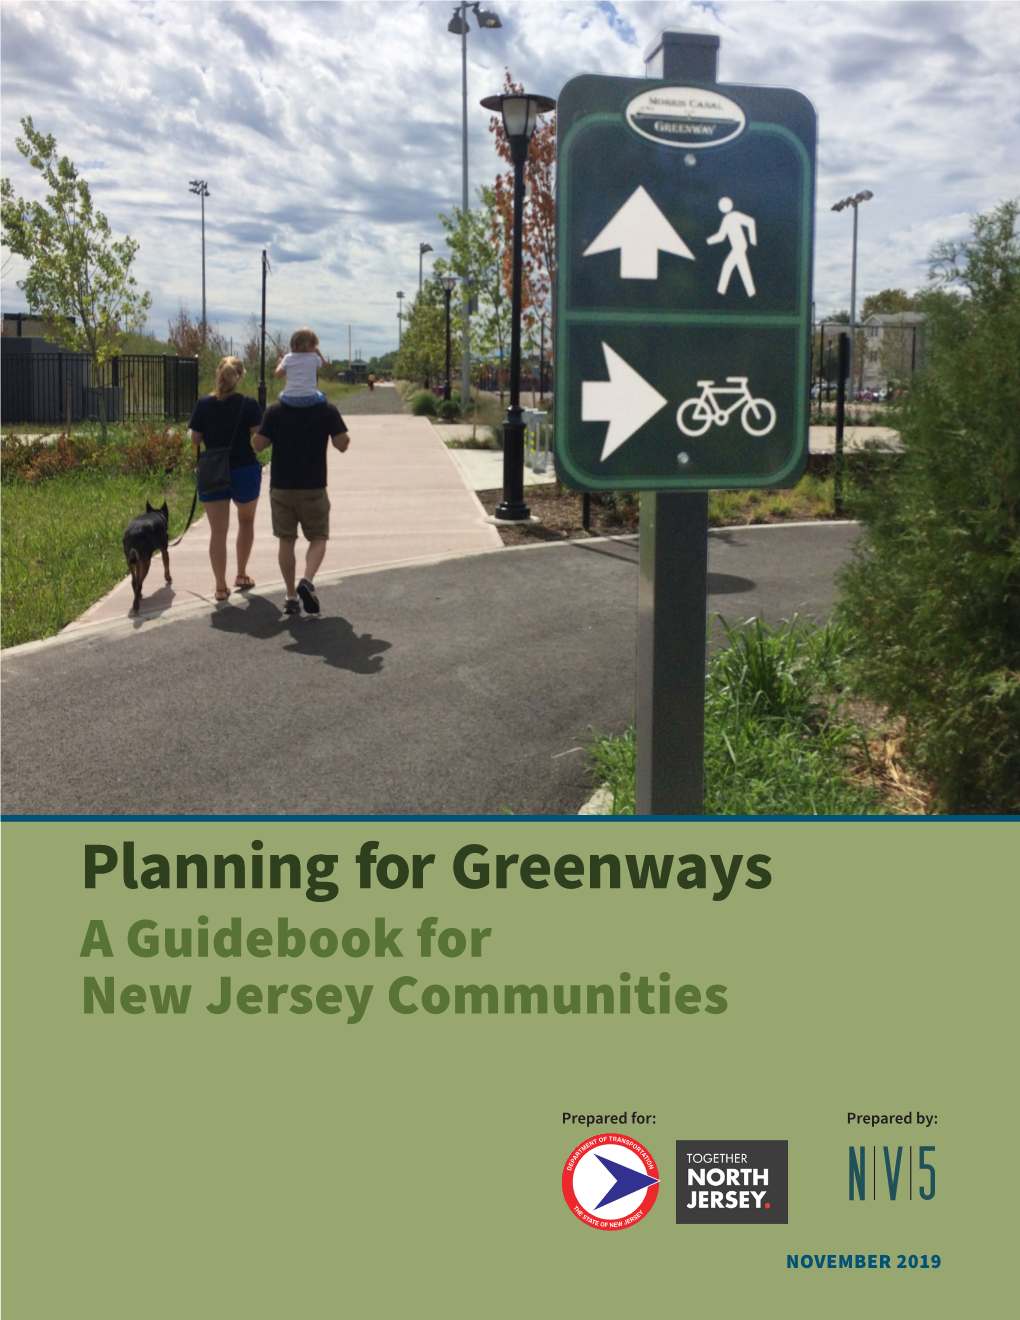 Planning for Greenways: a Guidebook for New Jersey Communities